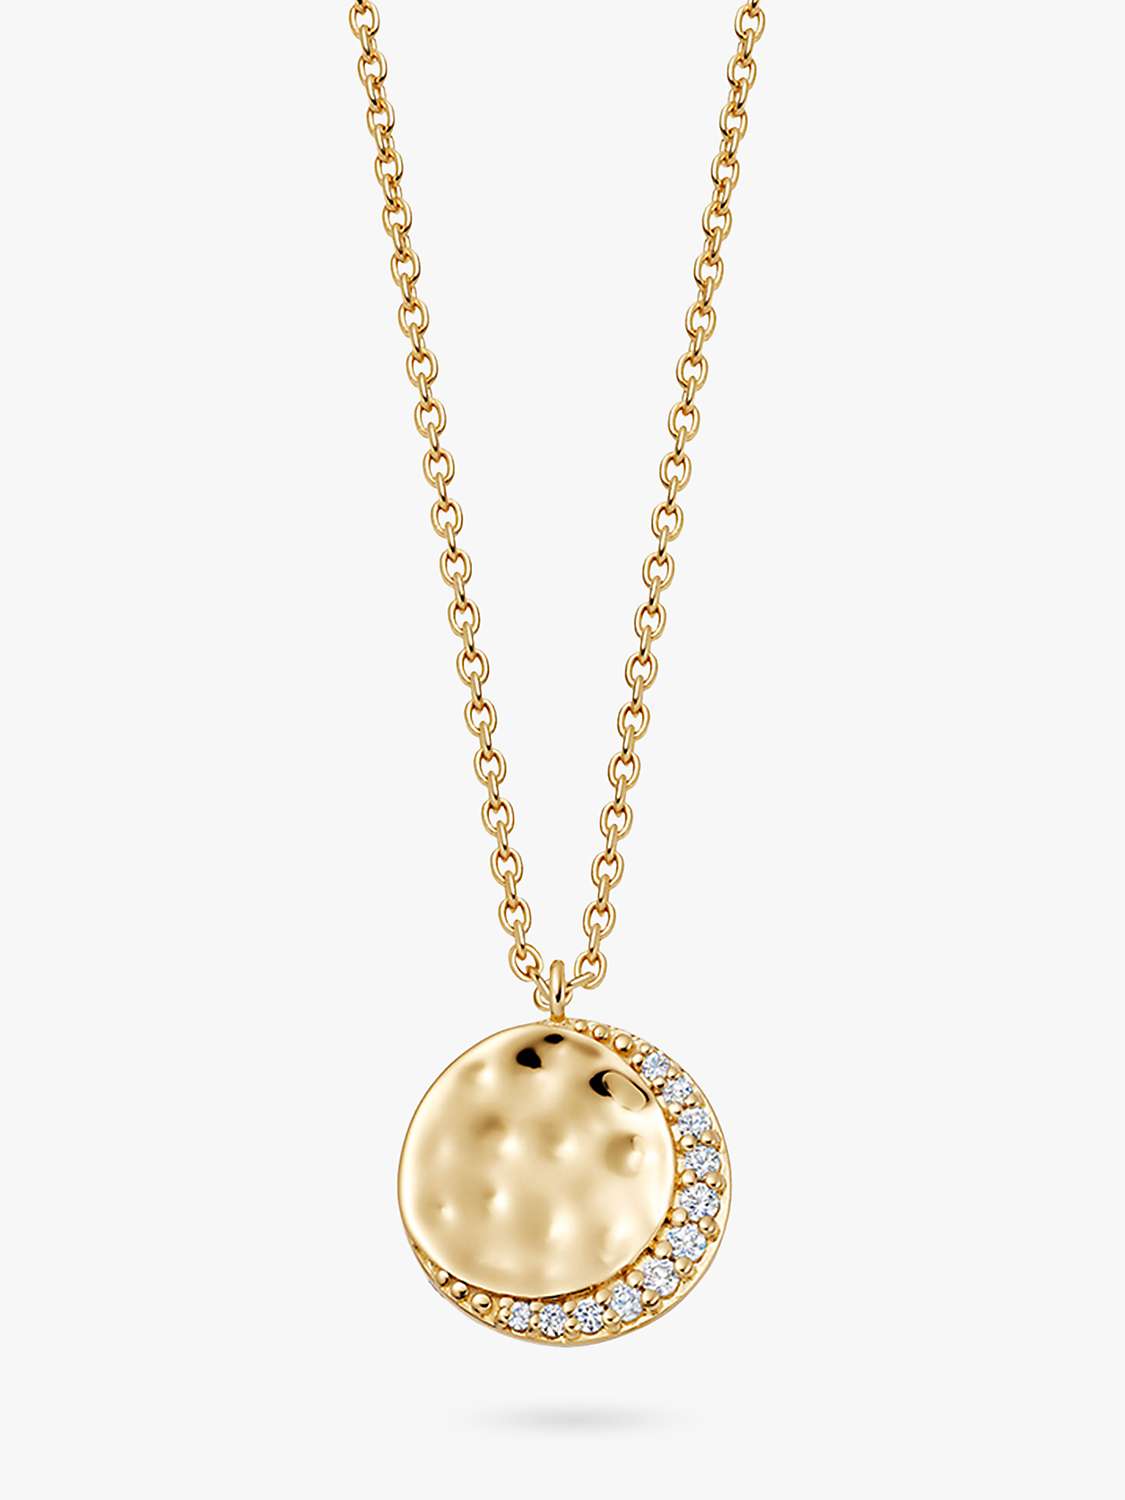 Buy Astley Clarke White Sapphire Hammered Pendant Necklace, Gold Online at johnlewis.com